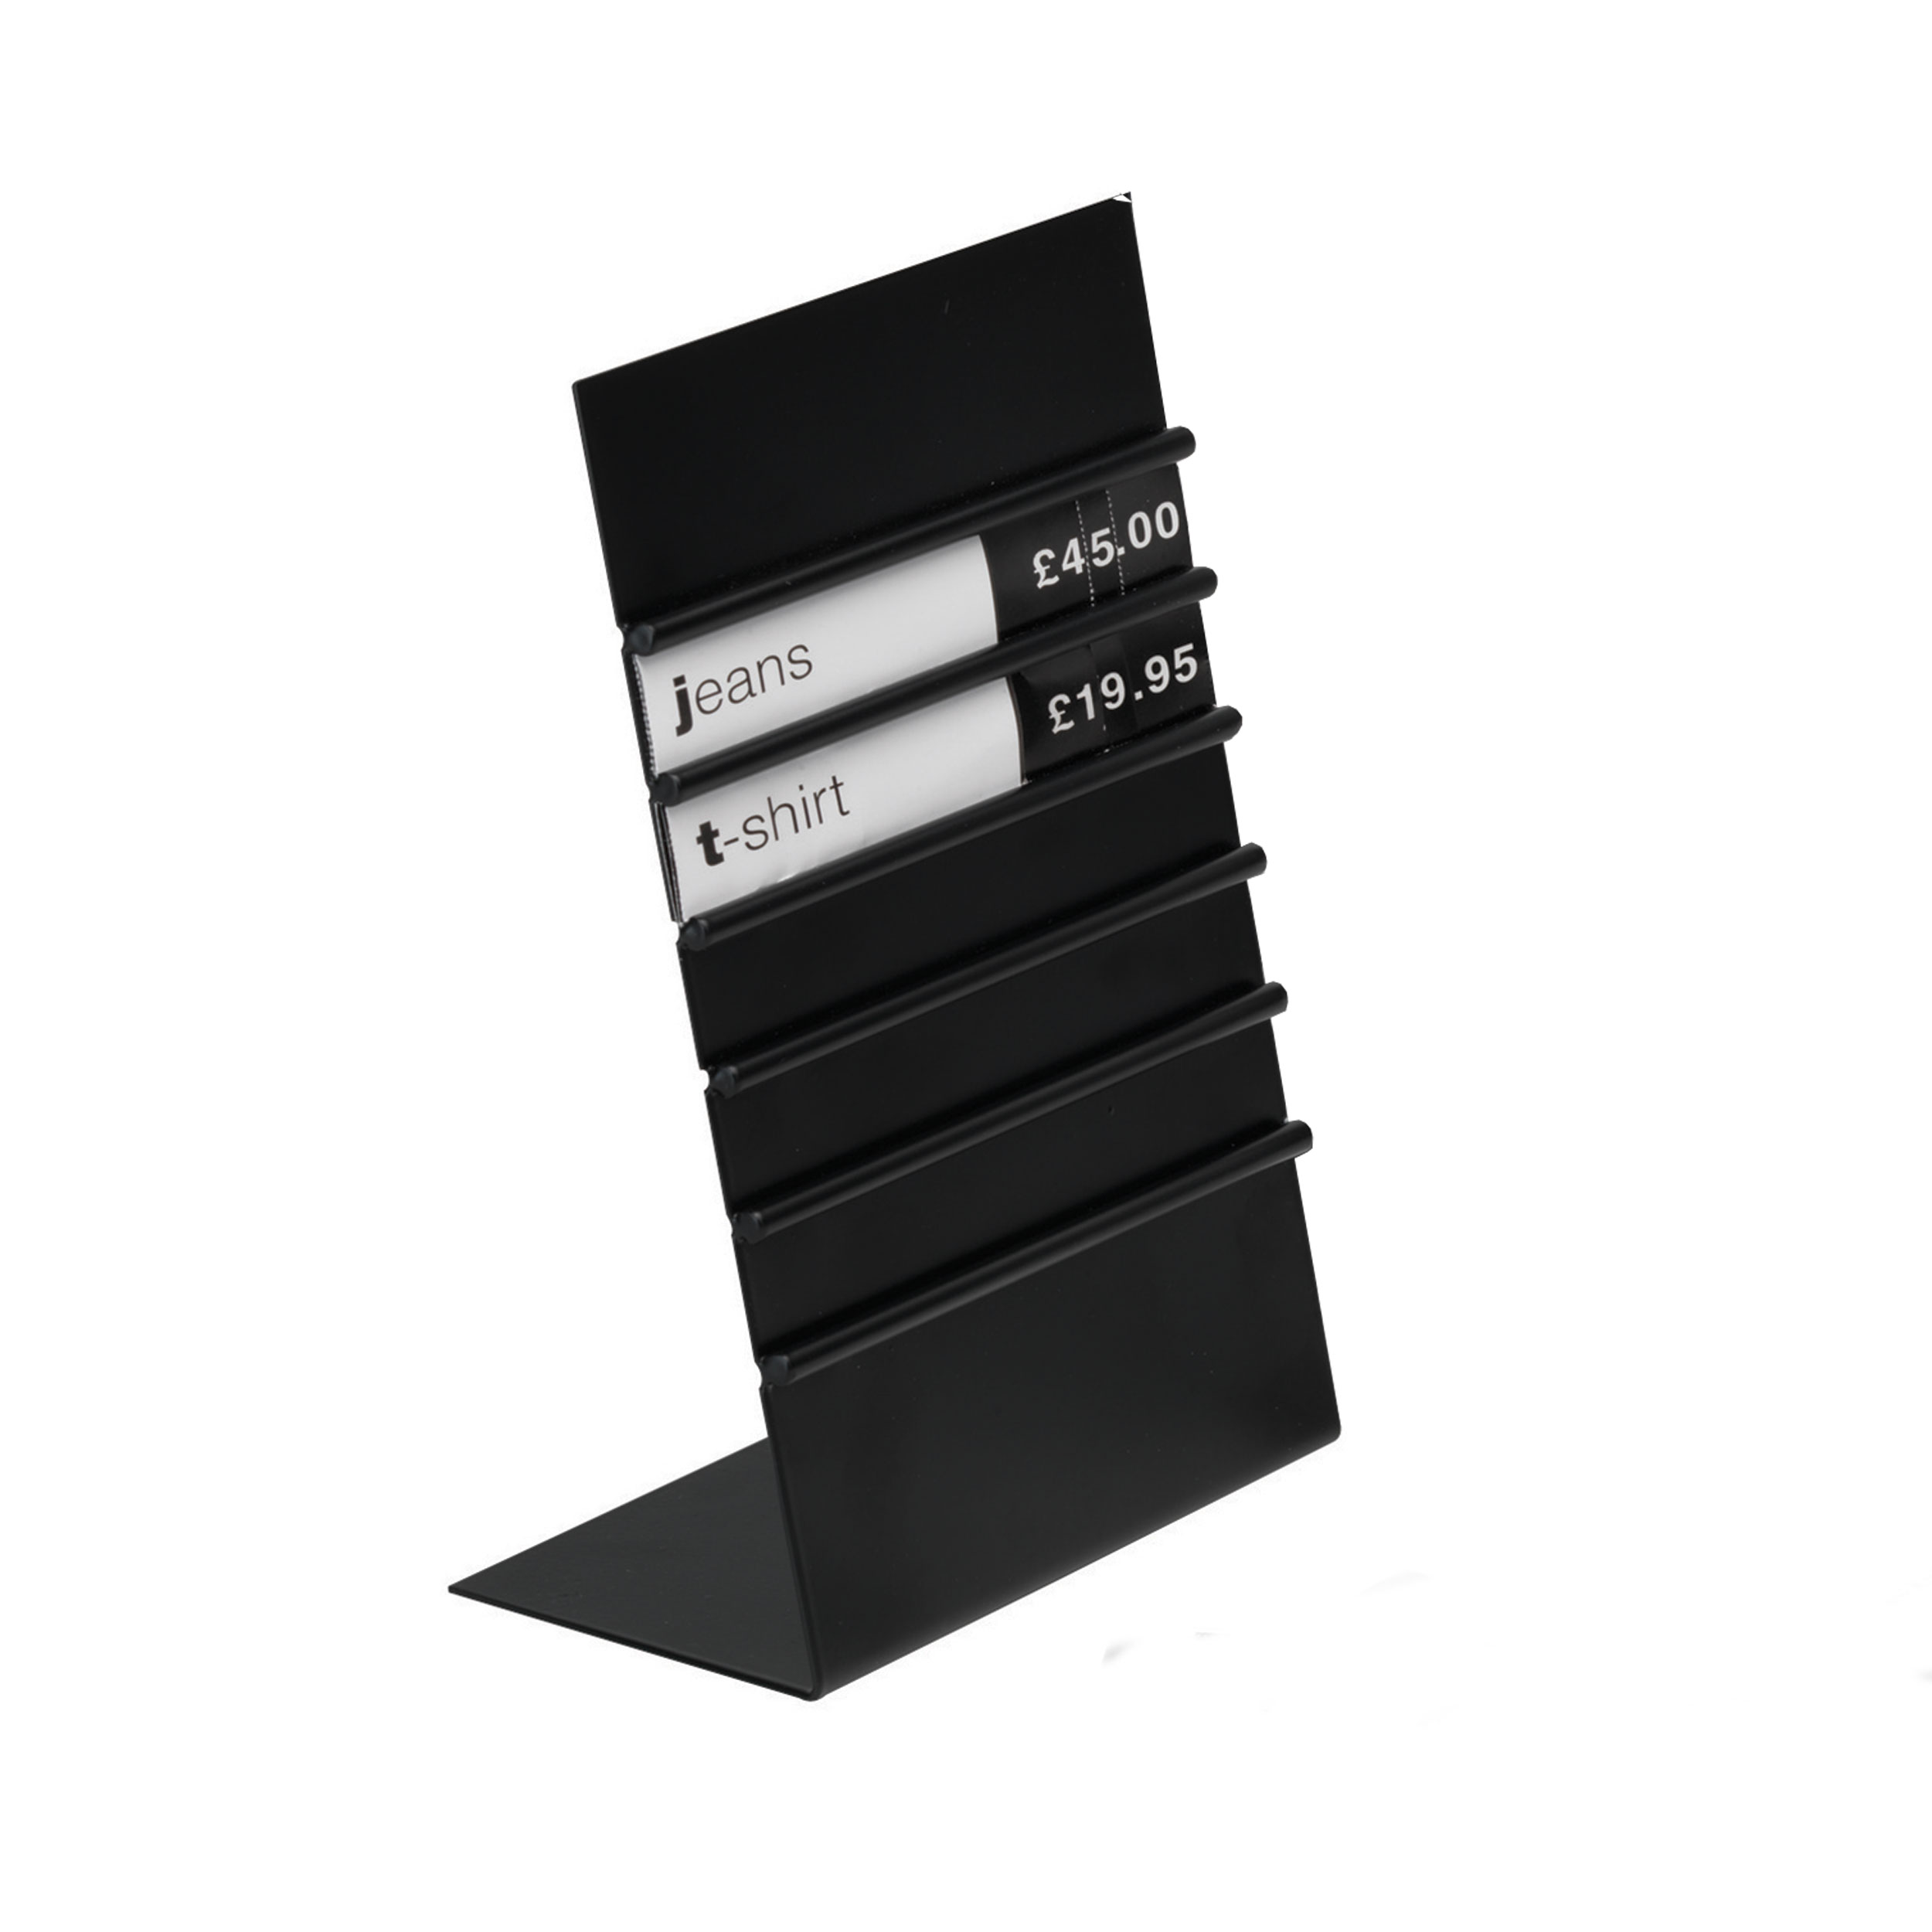 Price Display Holders & Stands